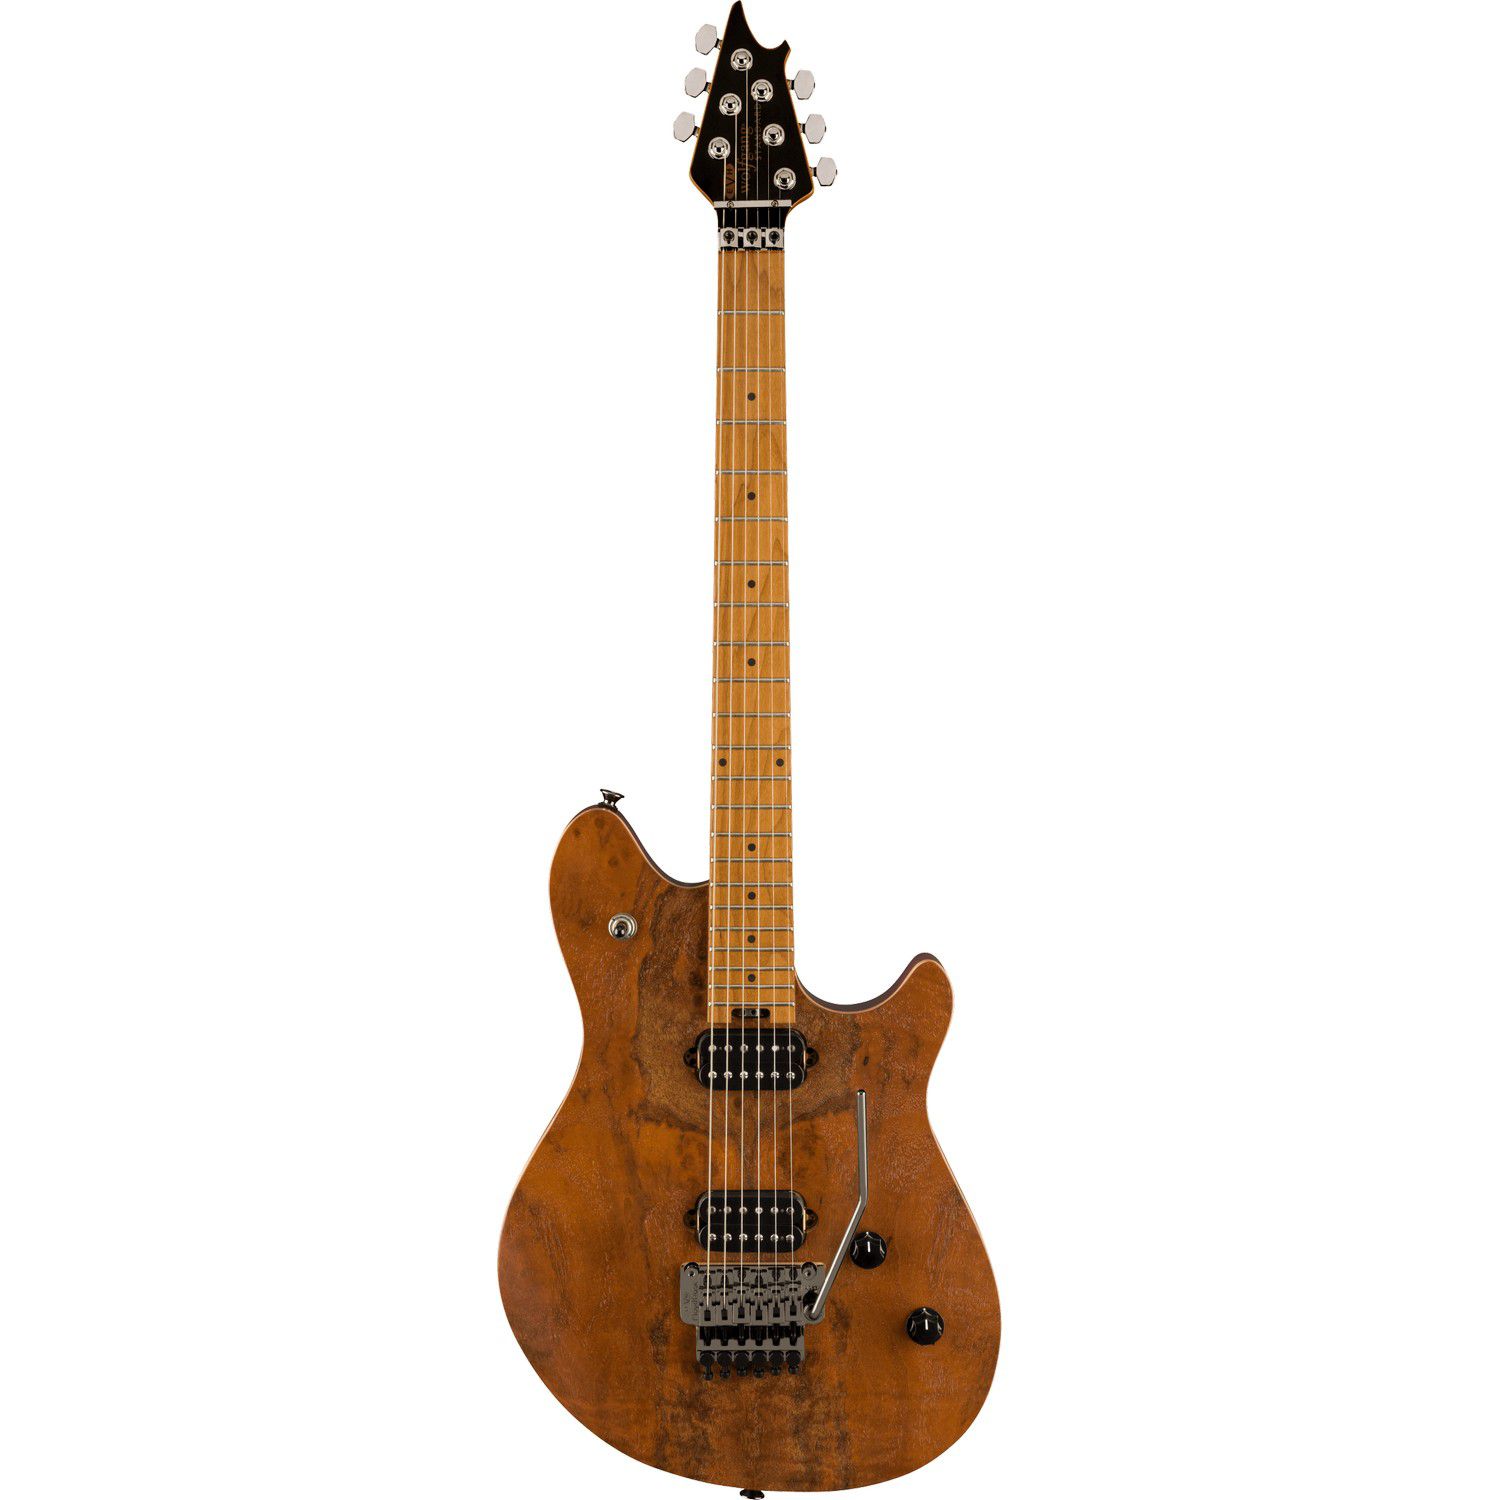 An image of Evh Wolfgang Standard Exotic Baked Maple Fb Black Walnut Electric Guitar